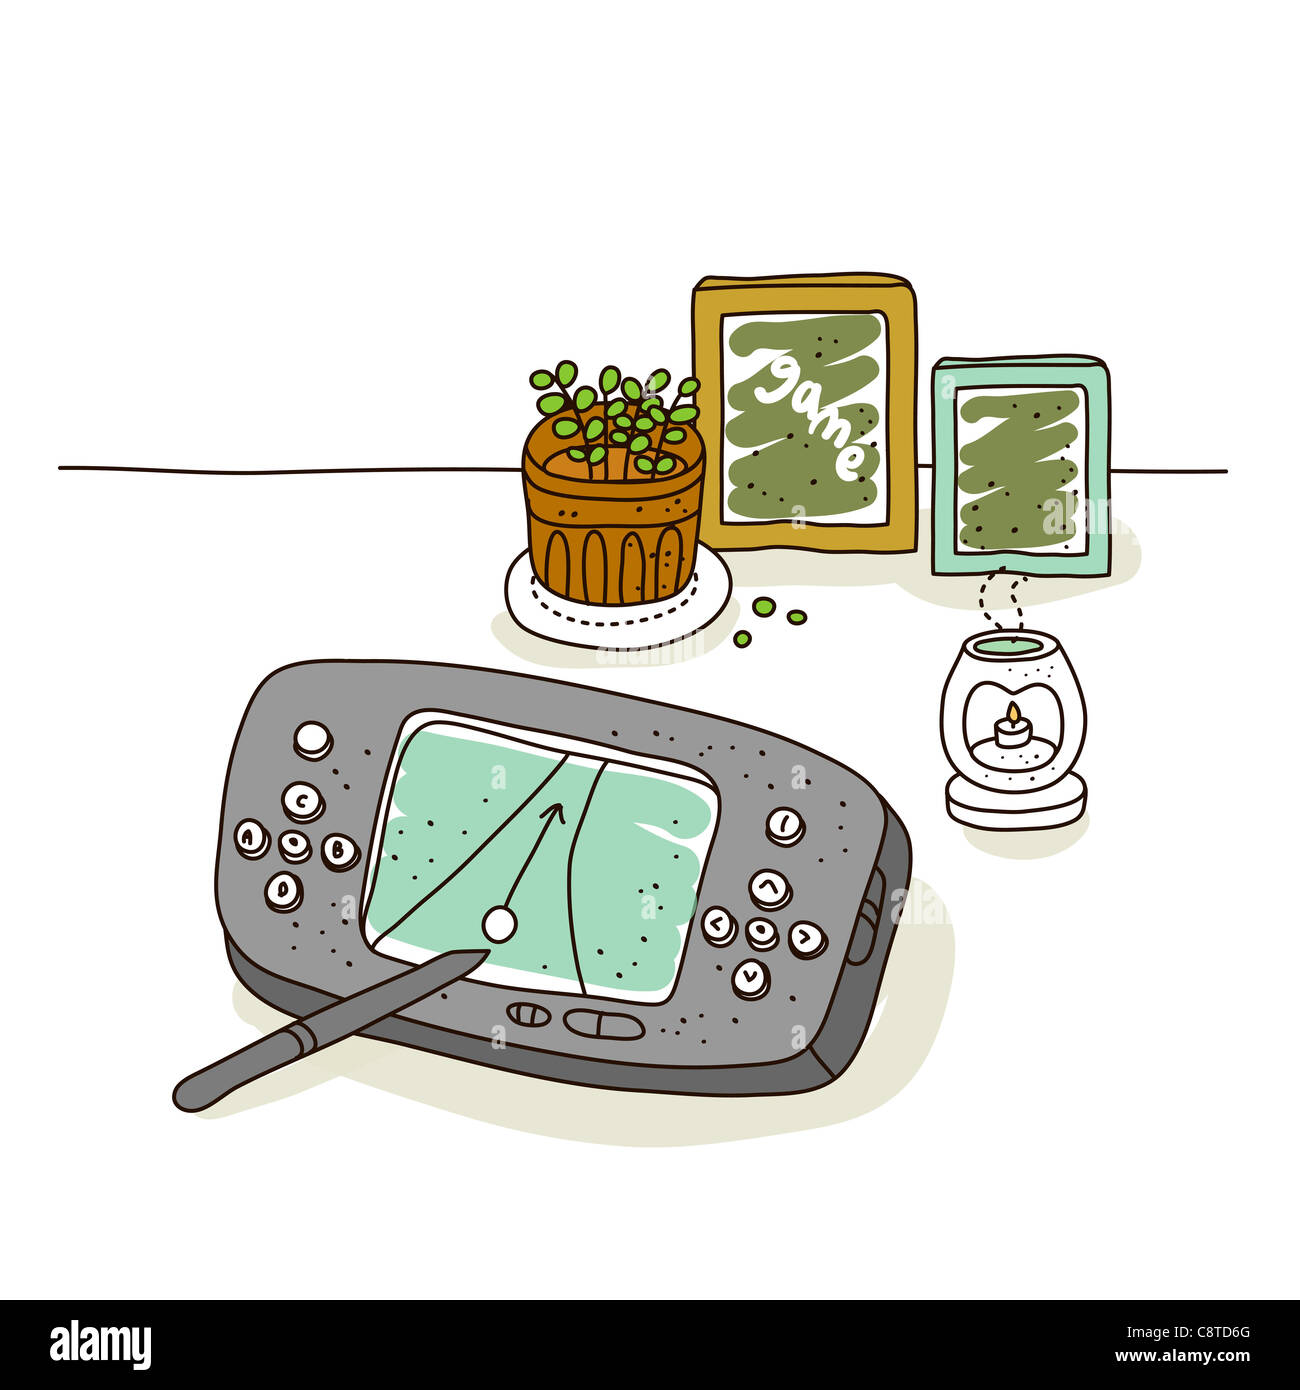 Illustration of video game Stock Photo